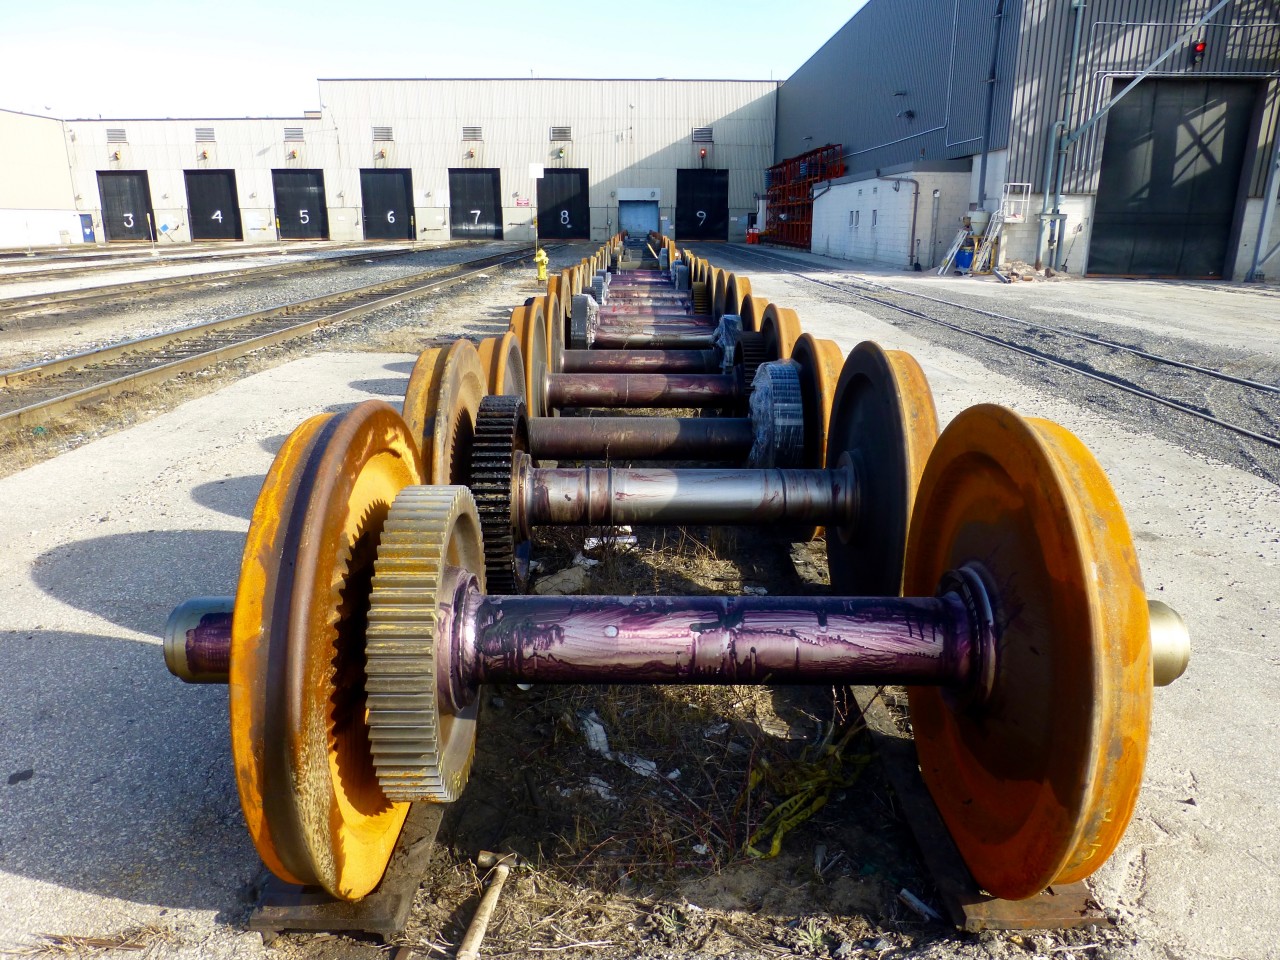 Need some traction? A line up of locomotive wheel sets sit outside the diesel shop at MacMillan Yard in Vaughn on a cold April morning. The gear attached to the axle along with gears in the traction motors themselves will decide the gear ration and thus the top speed of the locomotive. 62:18(62 gear teeth mated with 18 teeth) is the ratio for a locomotive with a top speed of 65MPH